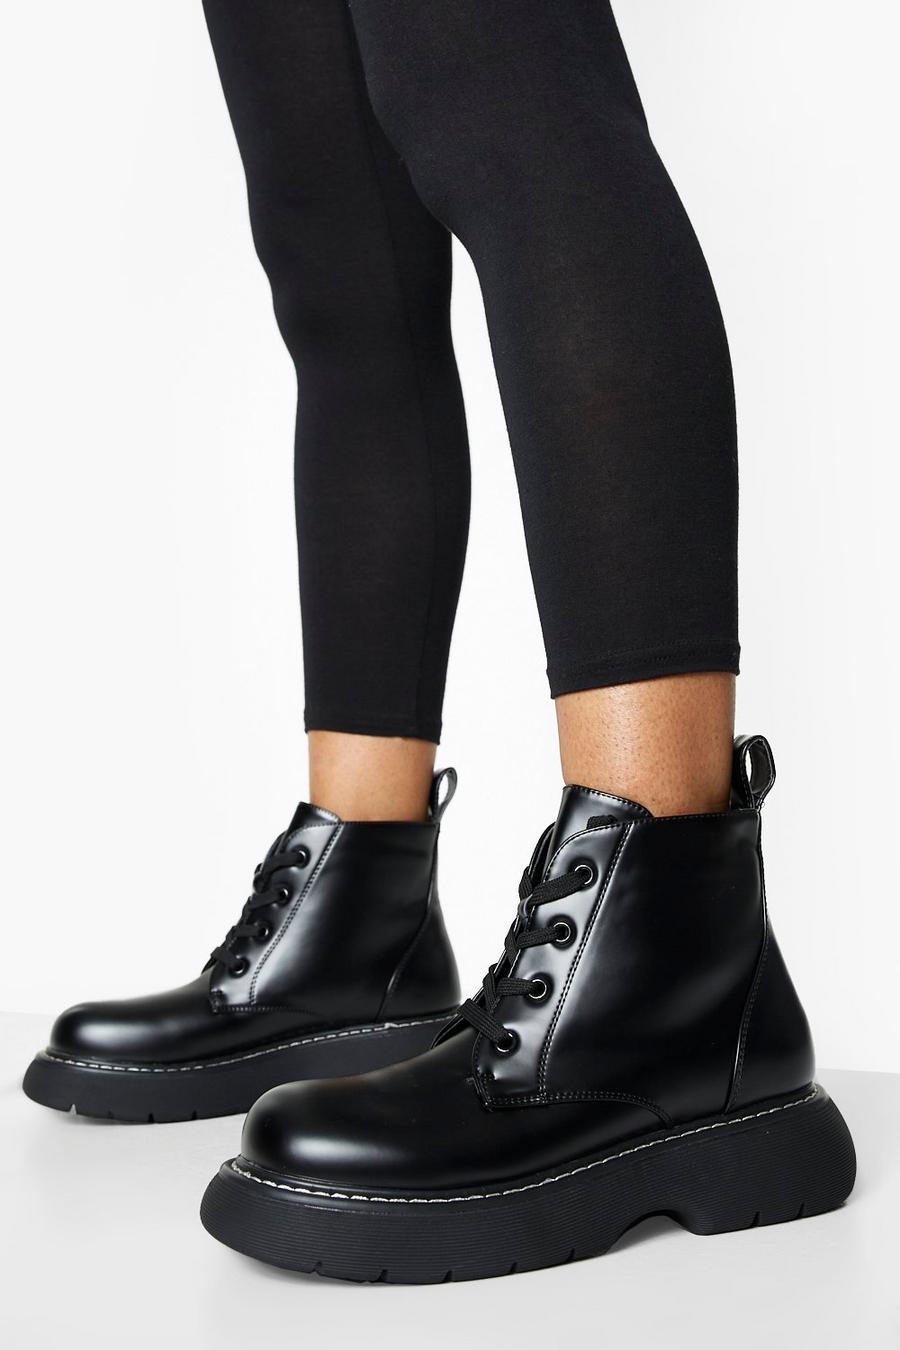 Black Chunky Sole Lace Up Hiker Boots